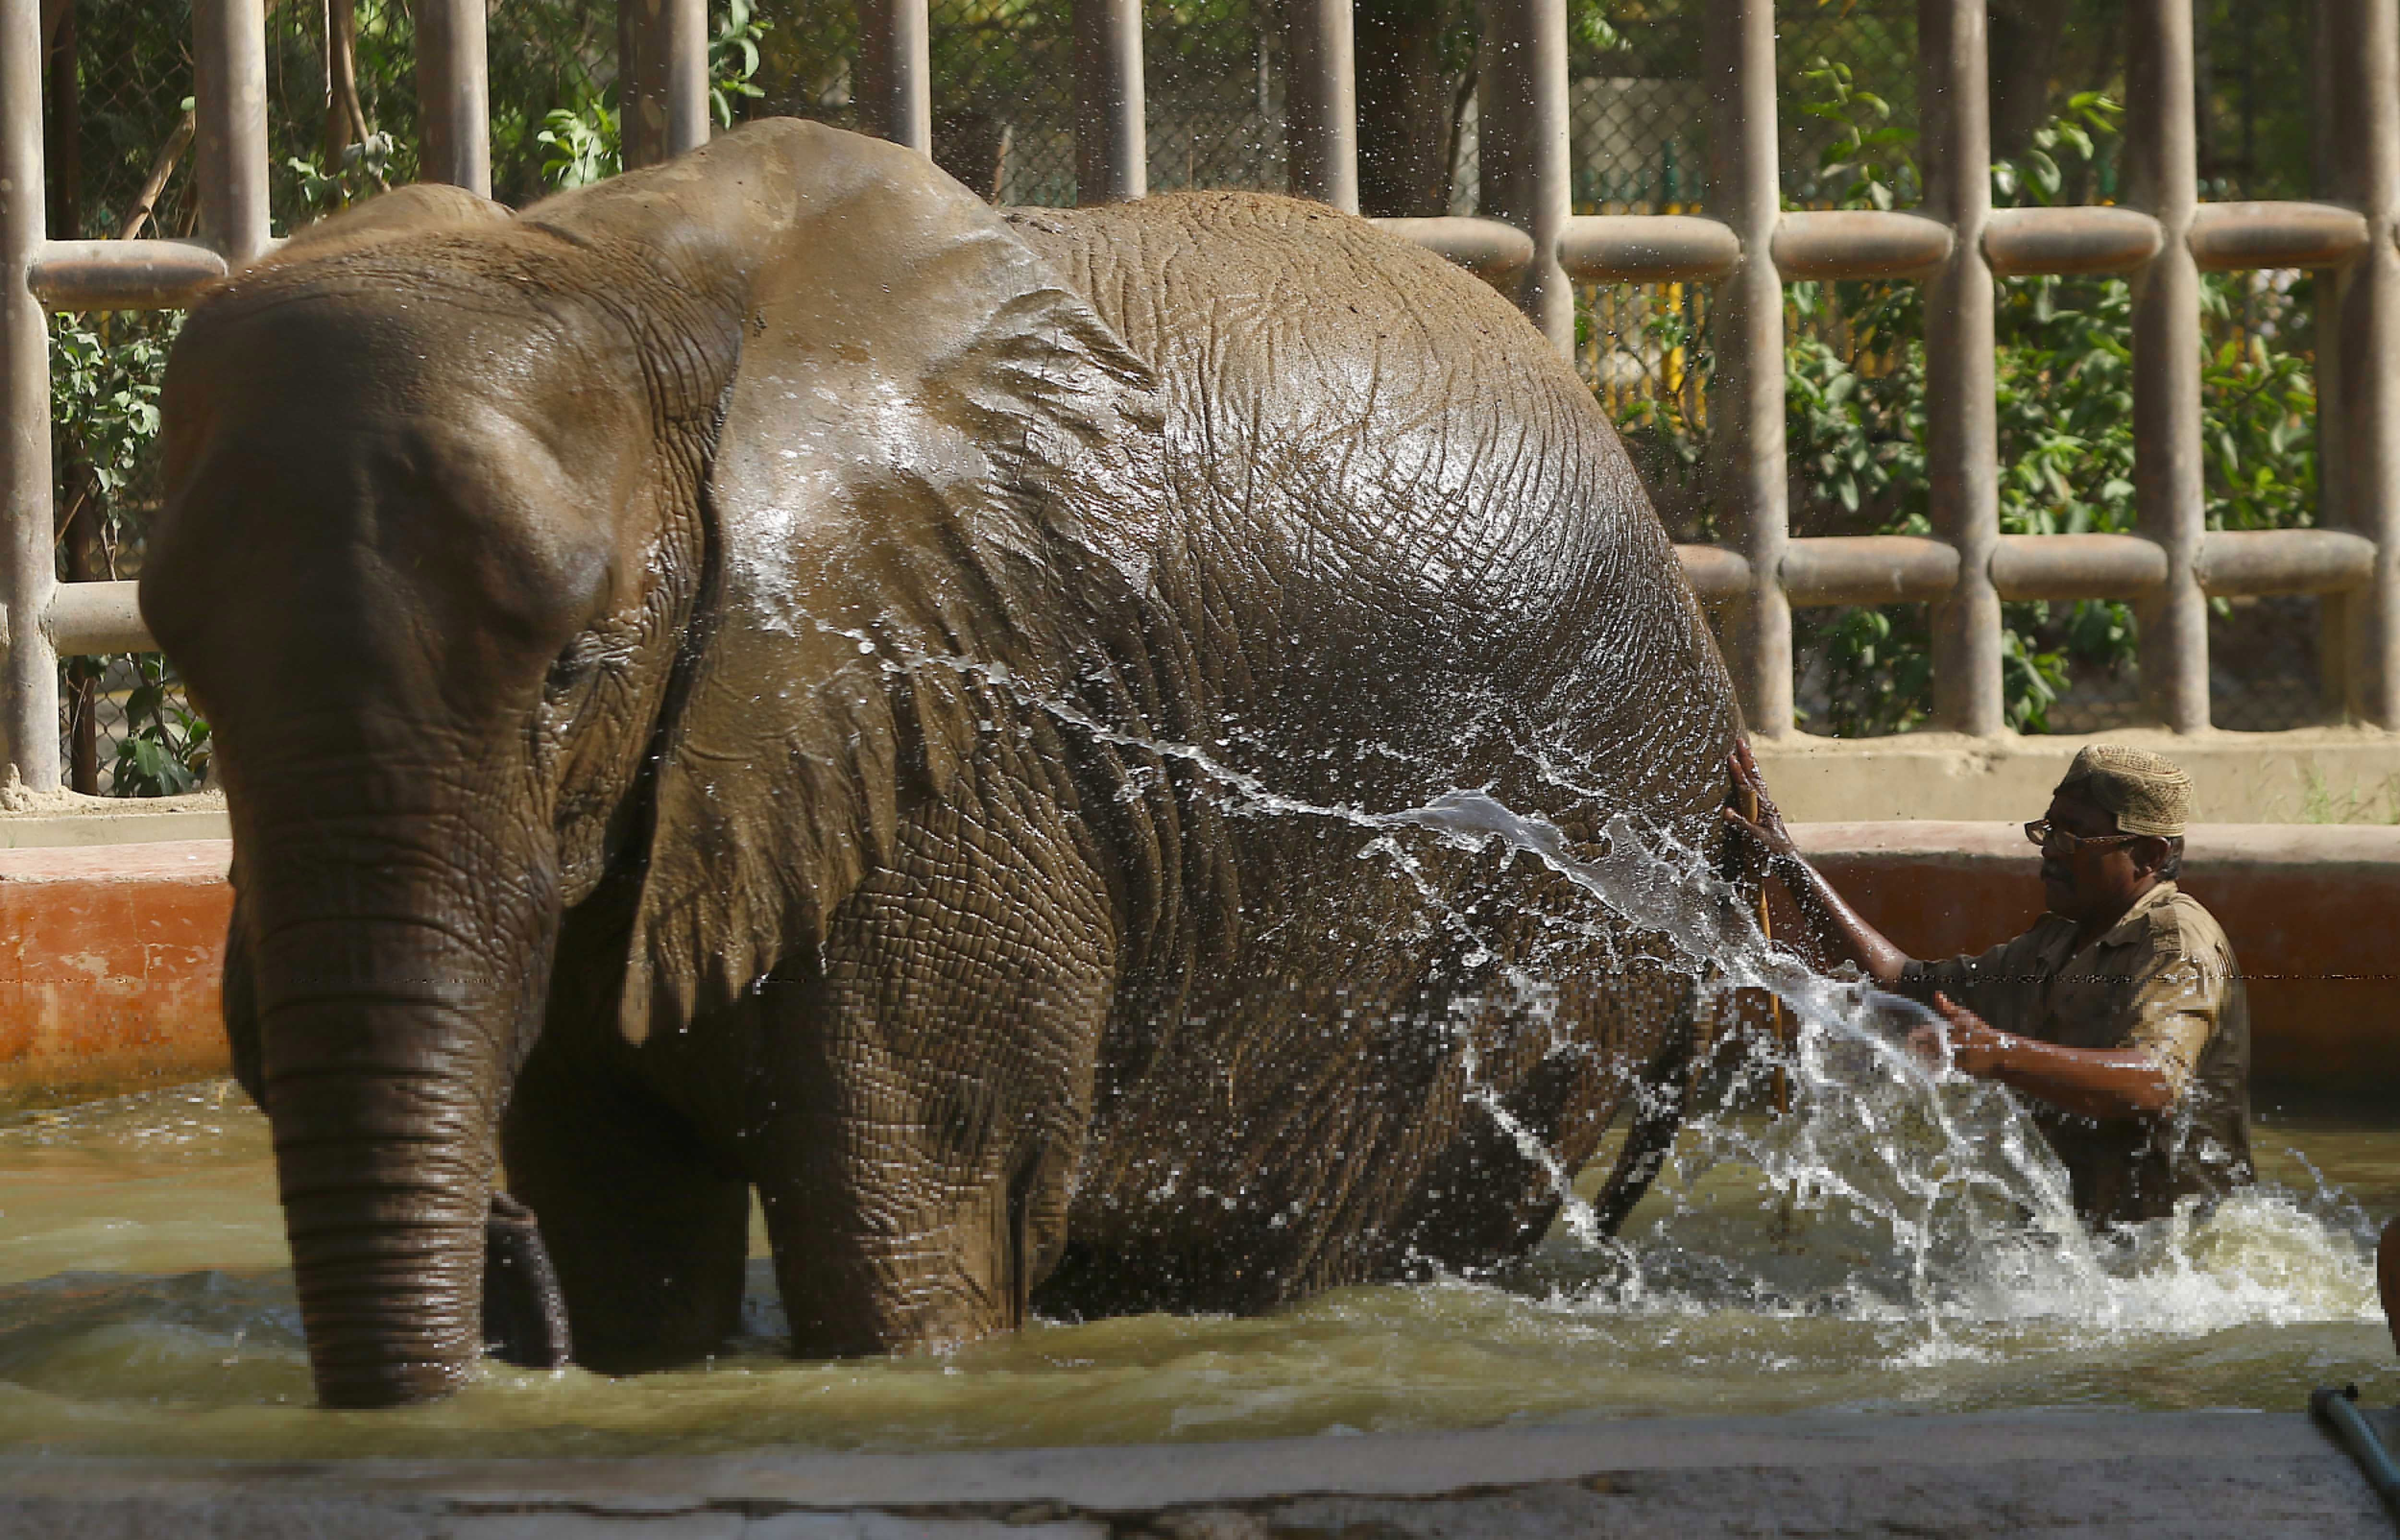 An elephant cools off at a zoo in Karachi, Pakistan on 31 March.